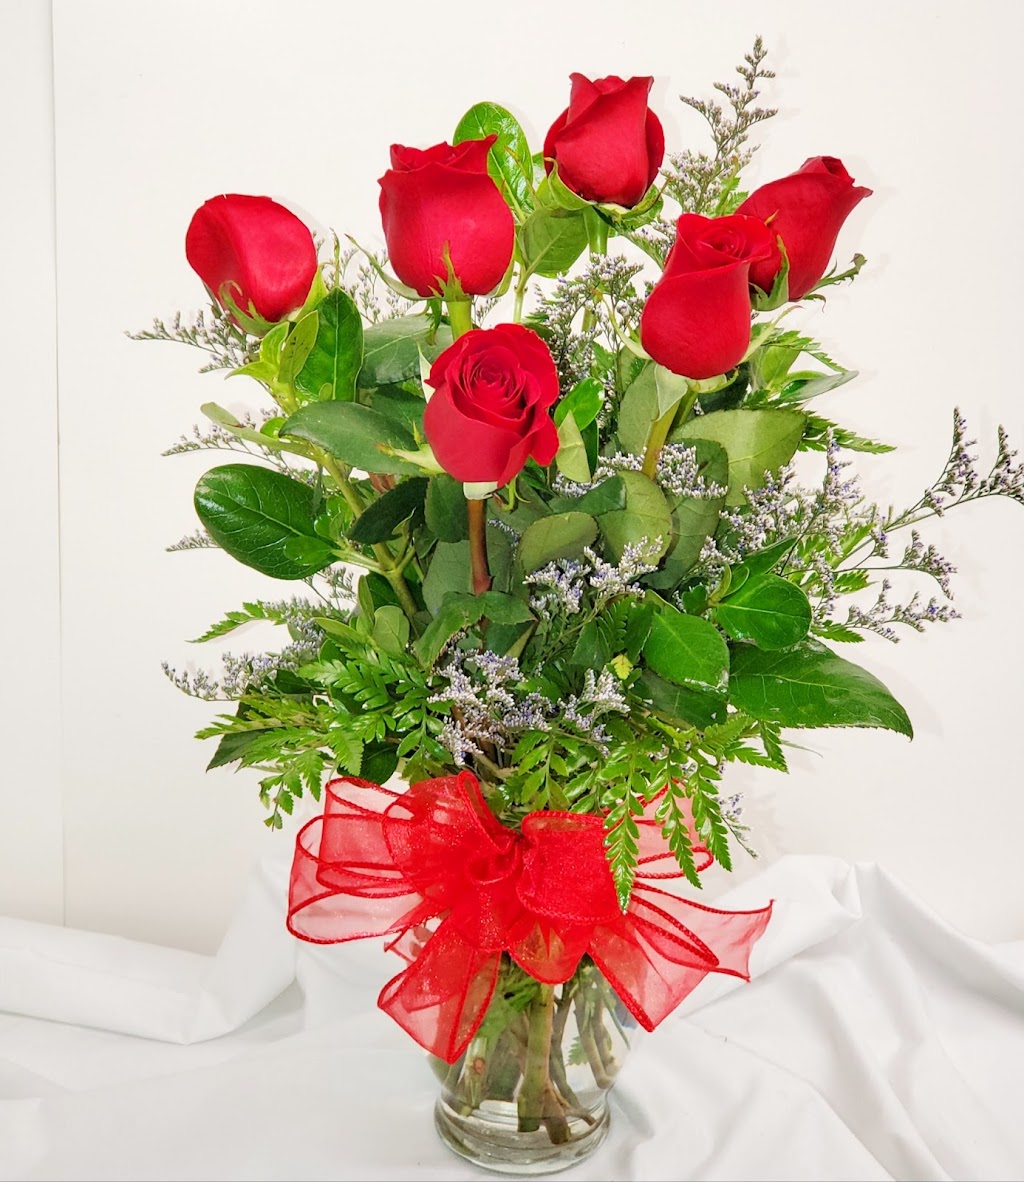 Roses and Such LLC ~ Florist / Flower Delivery | 1201 W Main St Suite B, Blue Springs, MO 64015, USA | Phone: (816) 224-0124